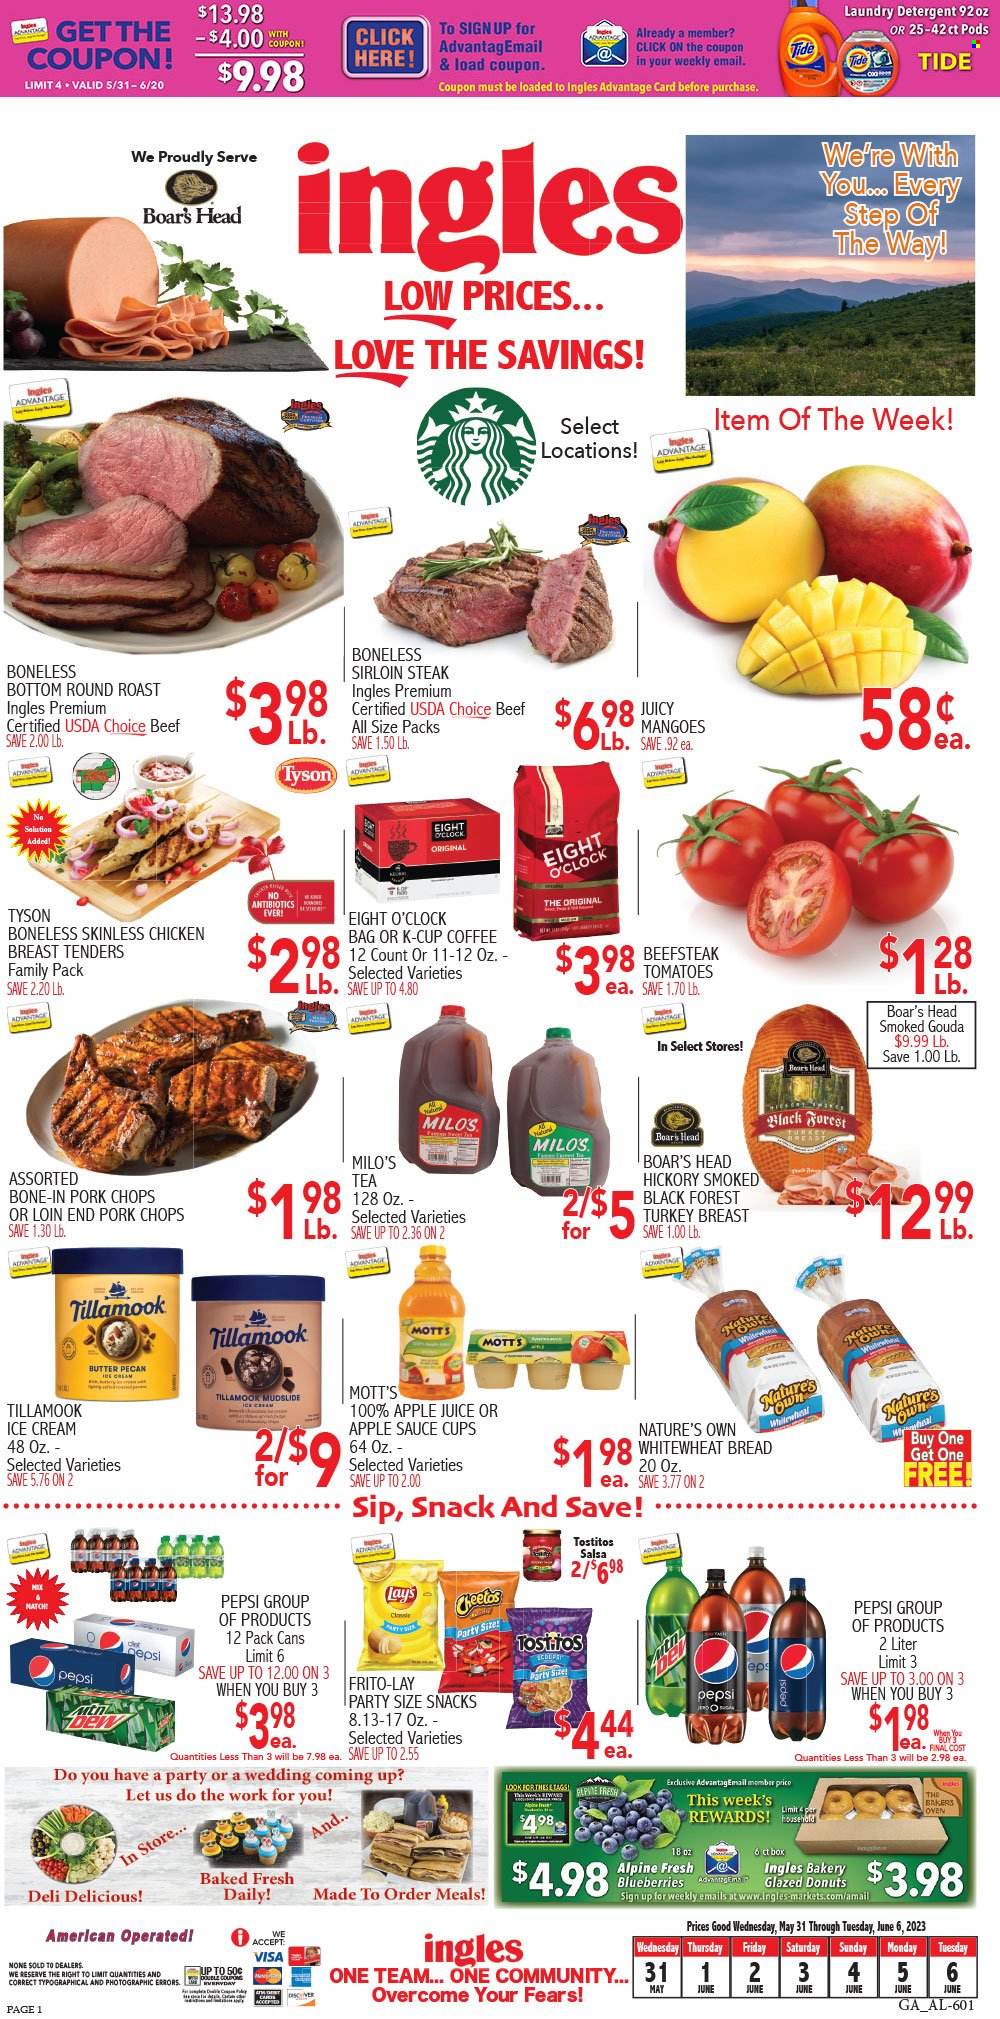 thumbnail - Ingles Flyer - 05/31/2023 - 06/06/2023 - Sales products - donut, tomatoes, blueberries, mango, Mott's, chicken tenders, sauce, roast, Boar's Head, snack, gouda, ice cream, Cheetos, Lay’s, Frito-Lay, Tostitos, salty snack, salsa, apple sauce, apple juice, Pepsi, juice, soft drink, Milo's, tea, coffee capsules, K-Cups, Eight O'Clock, turkey breast, chicken, turkey, beef meat, beef sirloin, steak, round roast, sirloin steak, pork chops, pork meat, detergent, Tide, laundry detergent, Bakers, Nature's Own. Page 1.